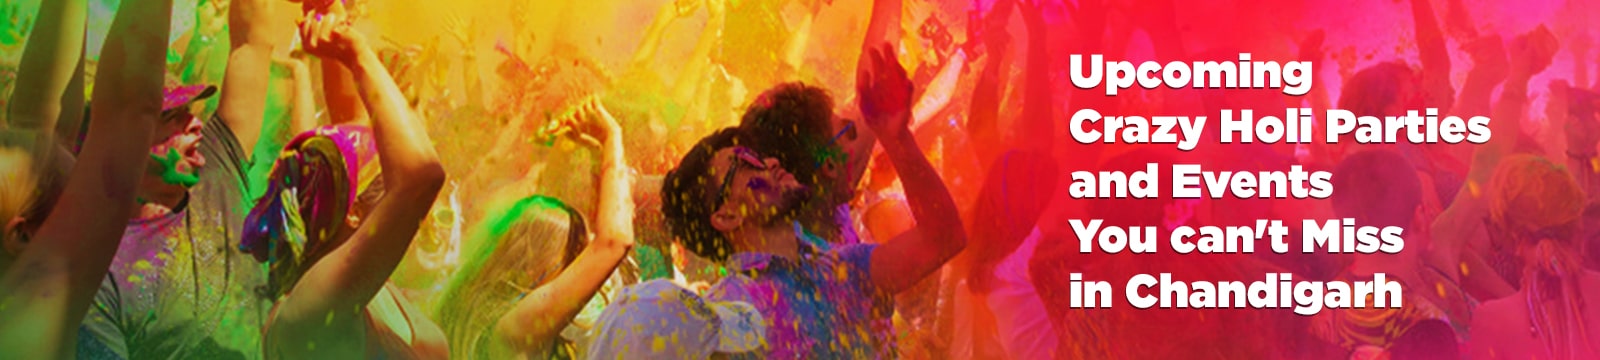 Upcoming Crazy Holi Parties and Events You can’t Miss in Chandigarh